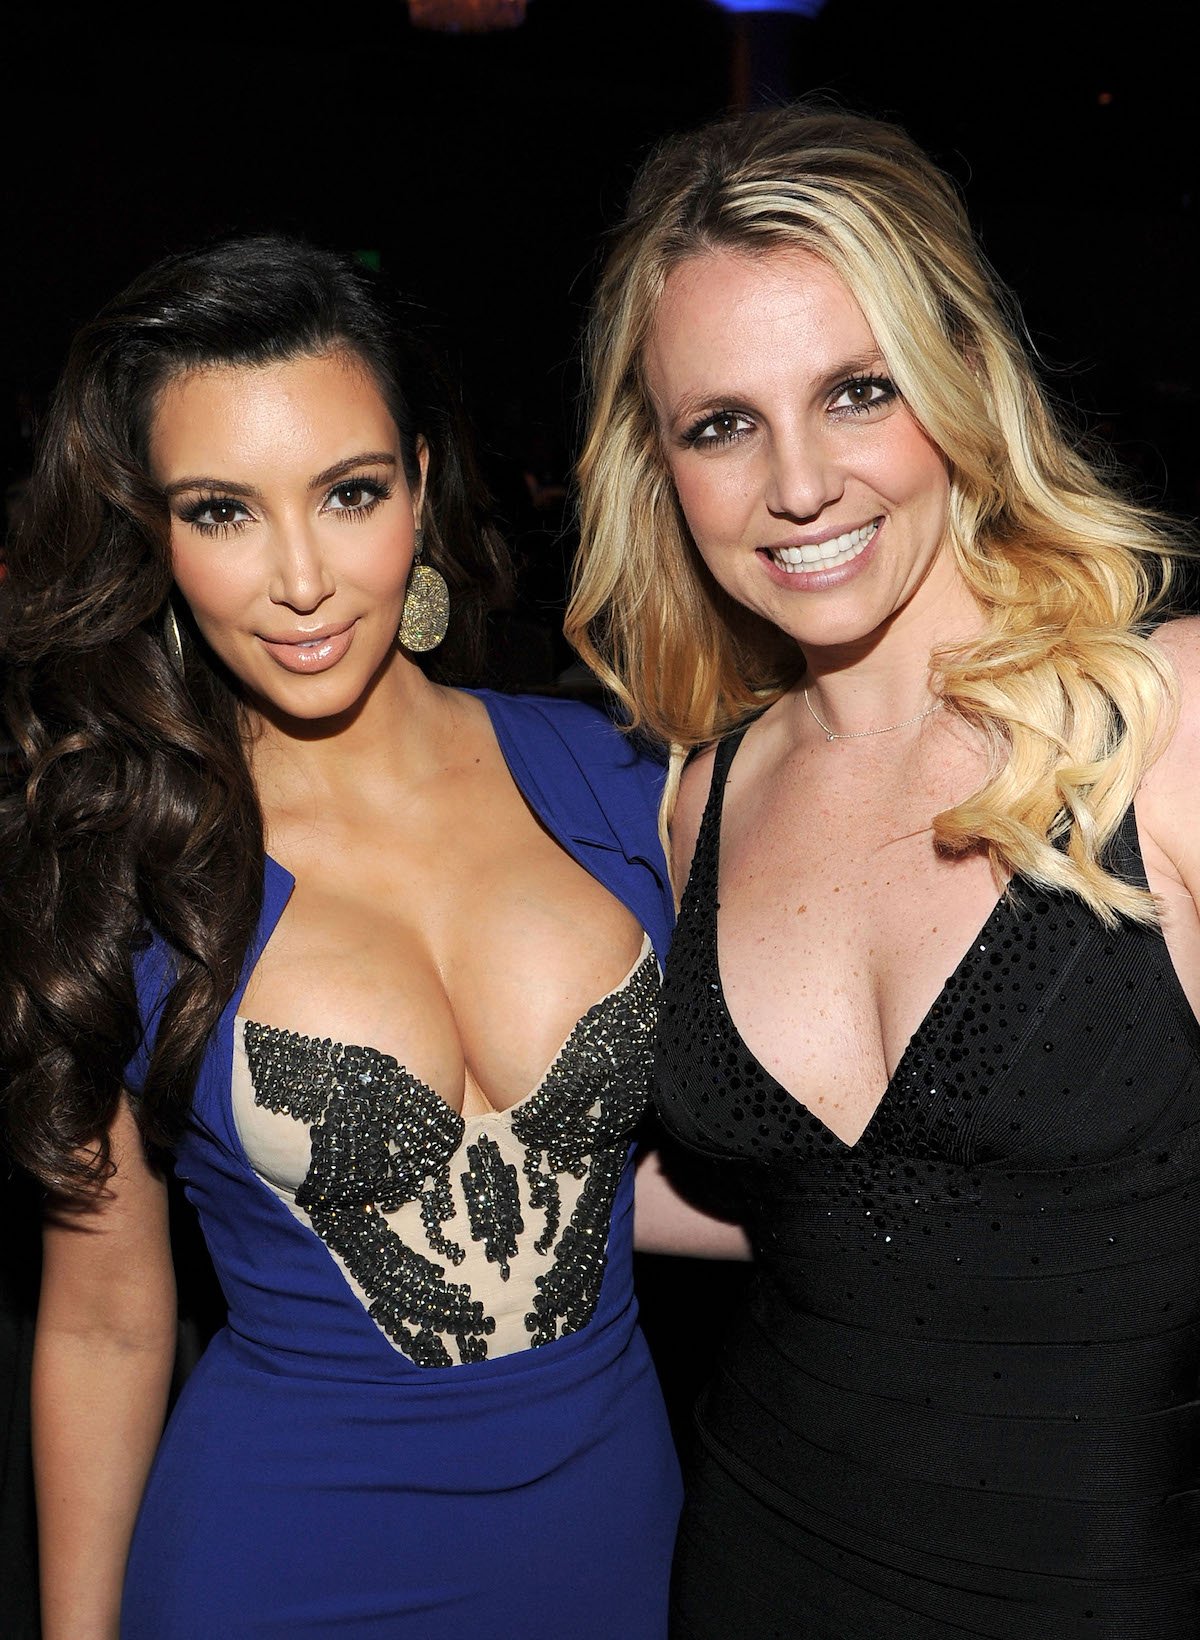 Kim Kardashian and Britney Spears pose together at an event.